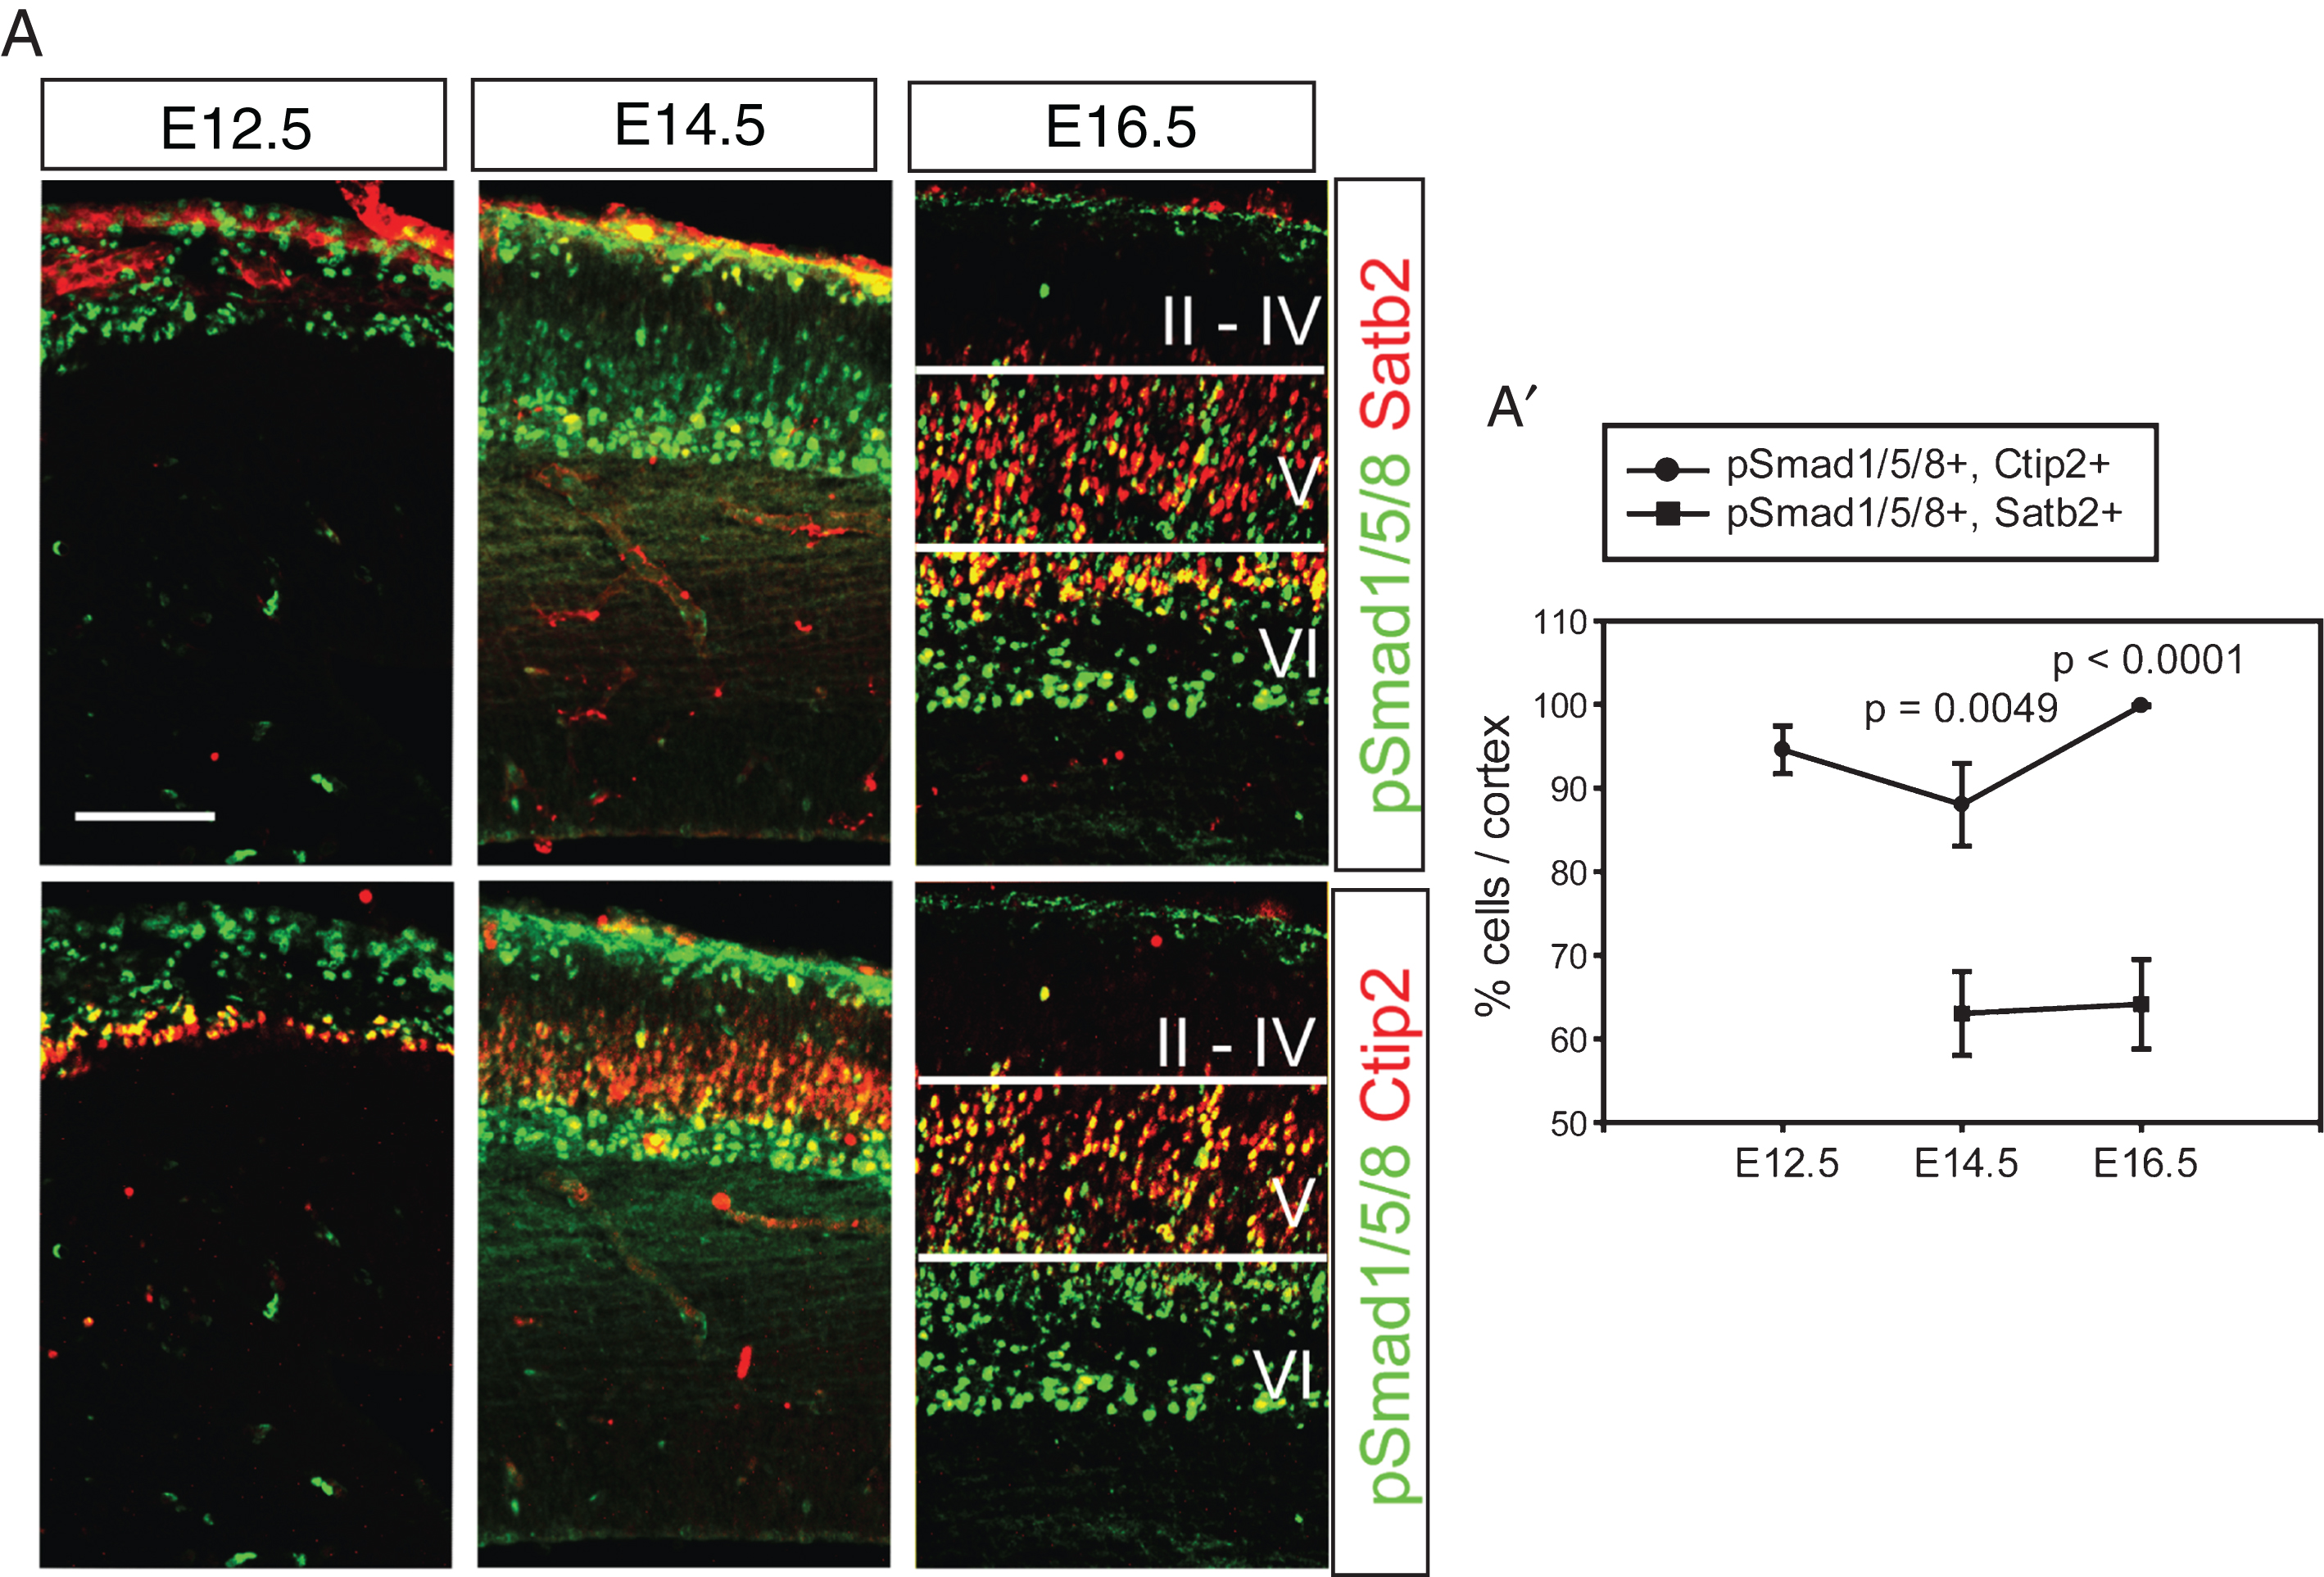 Activation of Bmp signaling in the postmitotic cortical neurons. A) Double staining of pSmad1/5/8 and Satb2 or Ctip2 during cortical neurogenesis. The same section was used to triple label pSmad1/5/8, Satb2 and Ctip2, and separate images are presented to show Satb2- and Ctip2-expressing neurons (red) in the presence of the same pSmad1/5/8 signals (green) in a tissue. A’) Double-stained cells were plotted. Error bars represent the SEM. Student’s t-test was conducted to determine the statistical significance of the difference between pSmad1/5/8+;Ctip2+ and pSmad1/5/8+; Satb2+ n = 3). Scale bars = 100 μm.